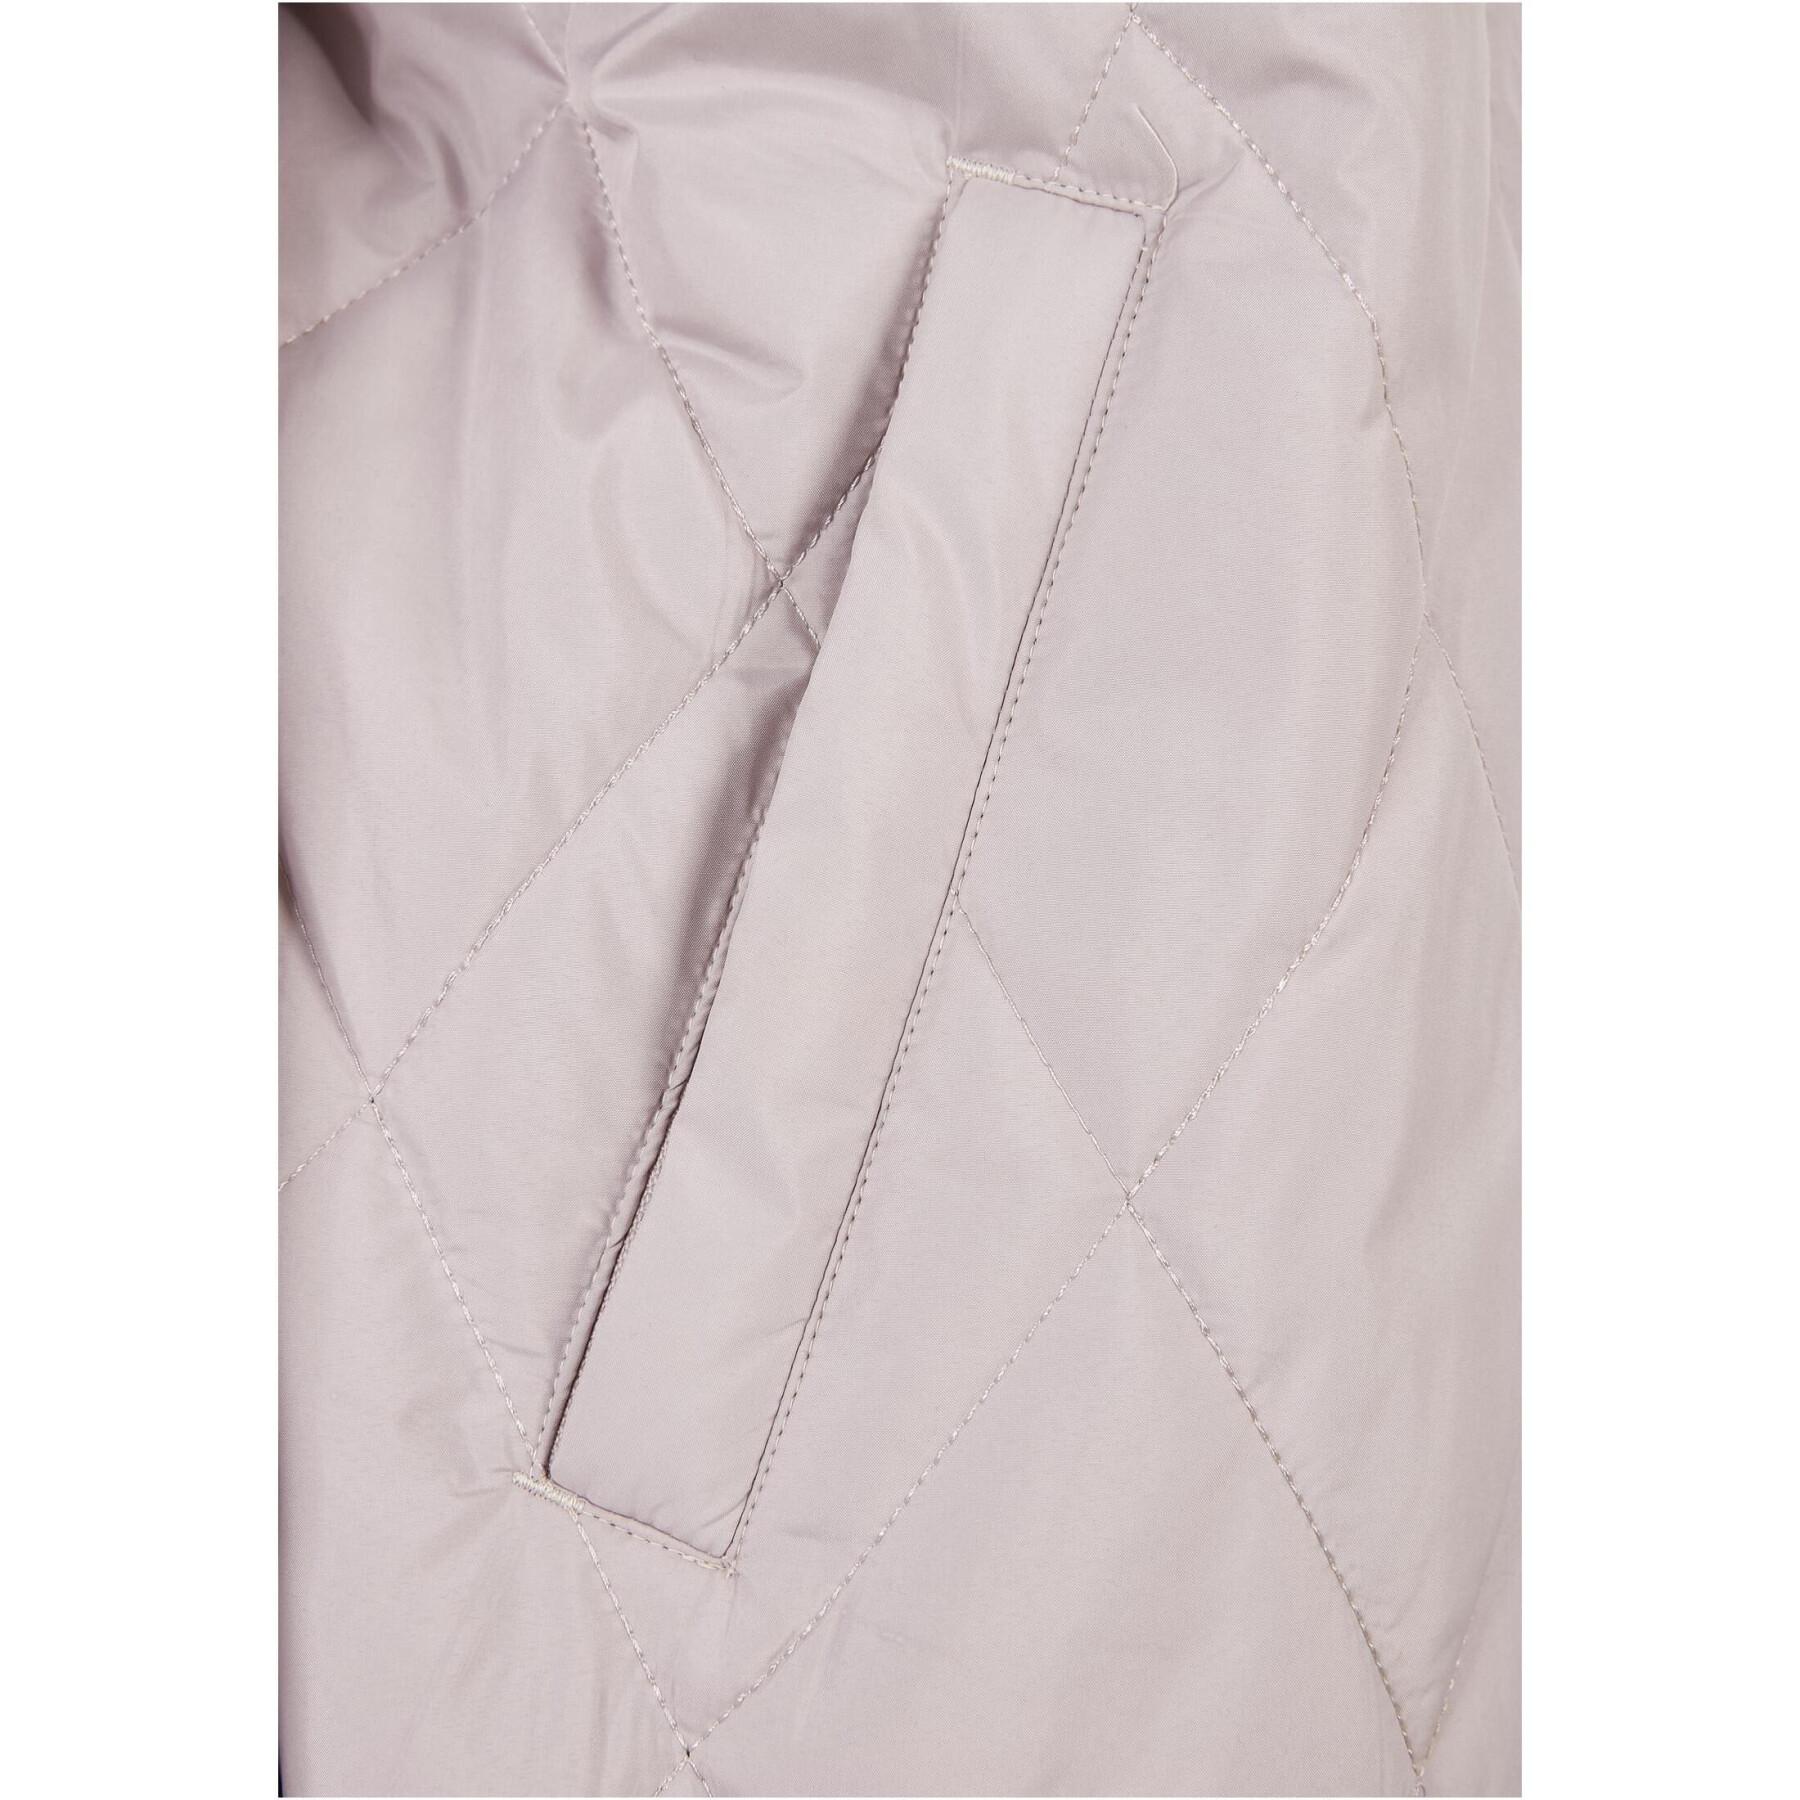 Women's hooded parka Urban Classics Oversized Diamond Quilted